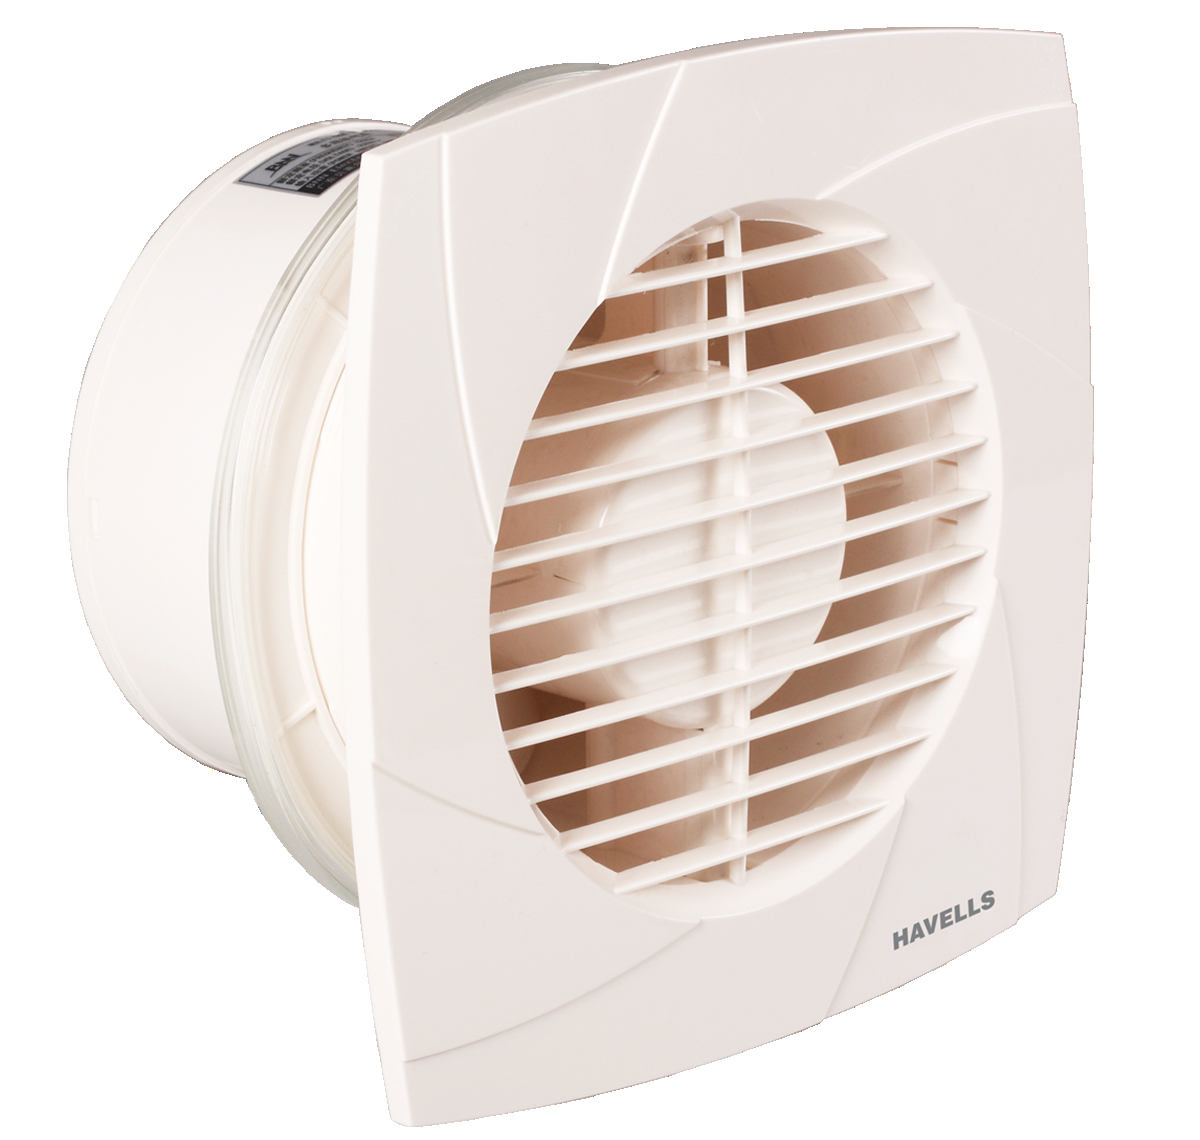 Havells Ventil Air Dx 250 Mm 3 Blade Exhaust Fan White within dimensions 1200 X 1140